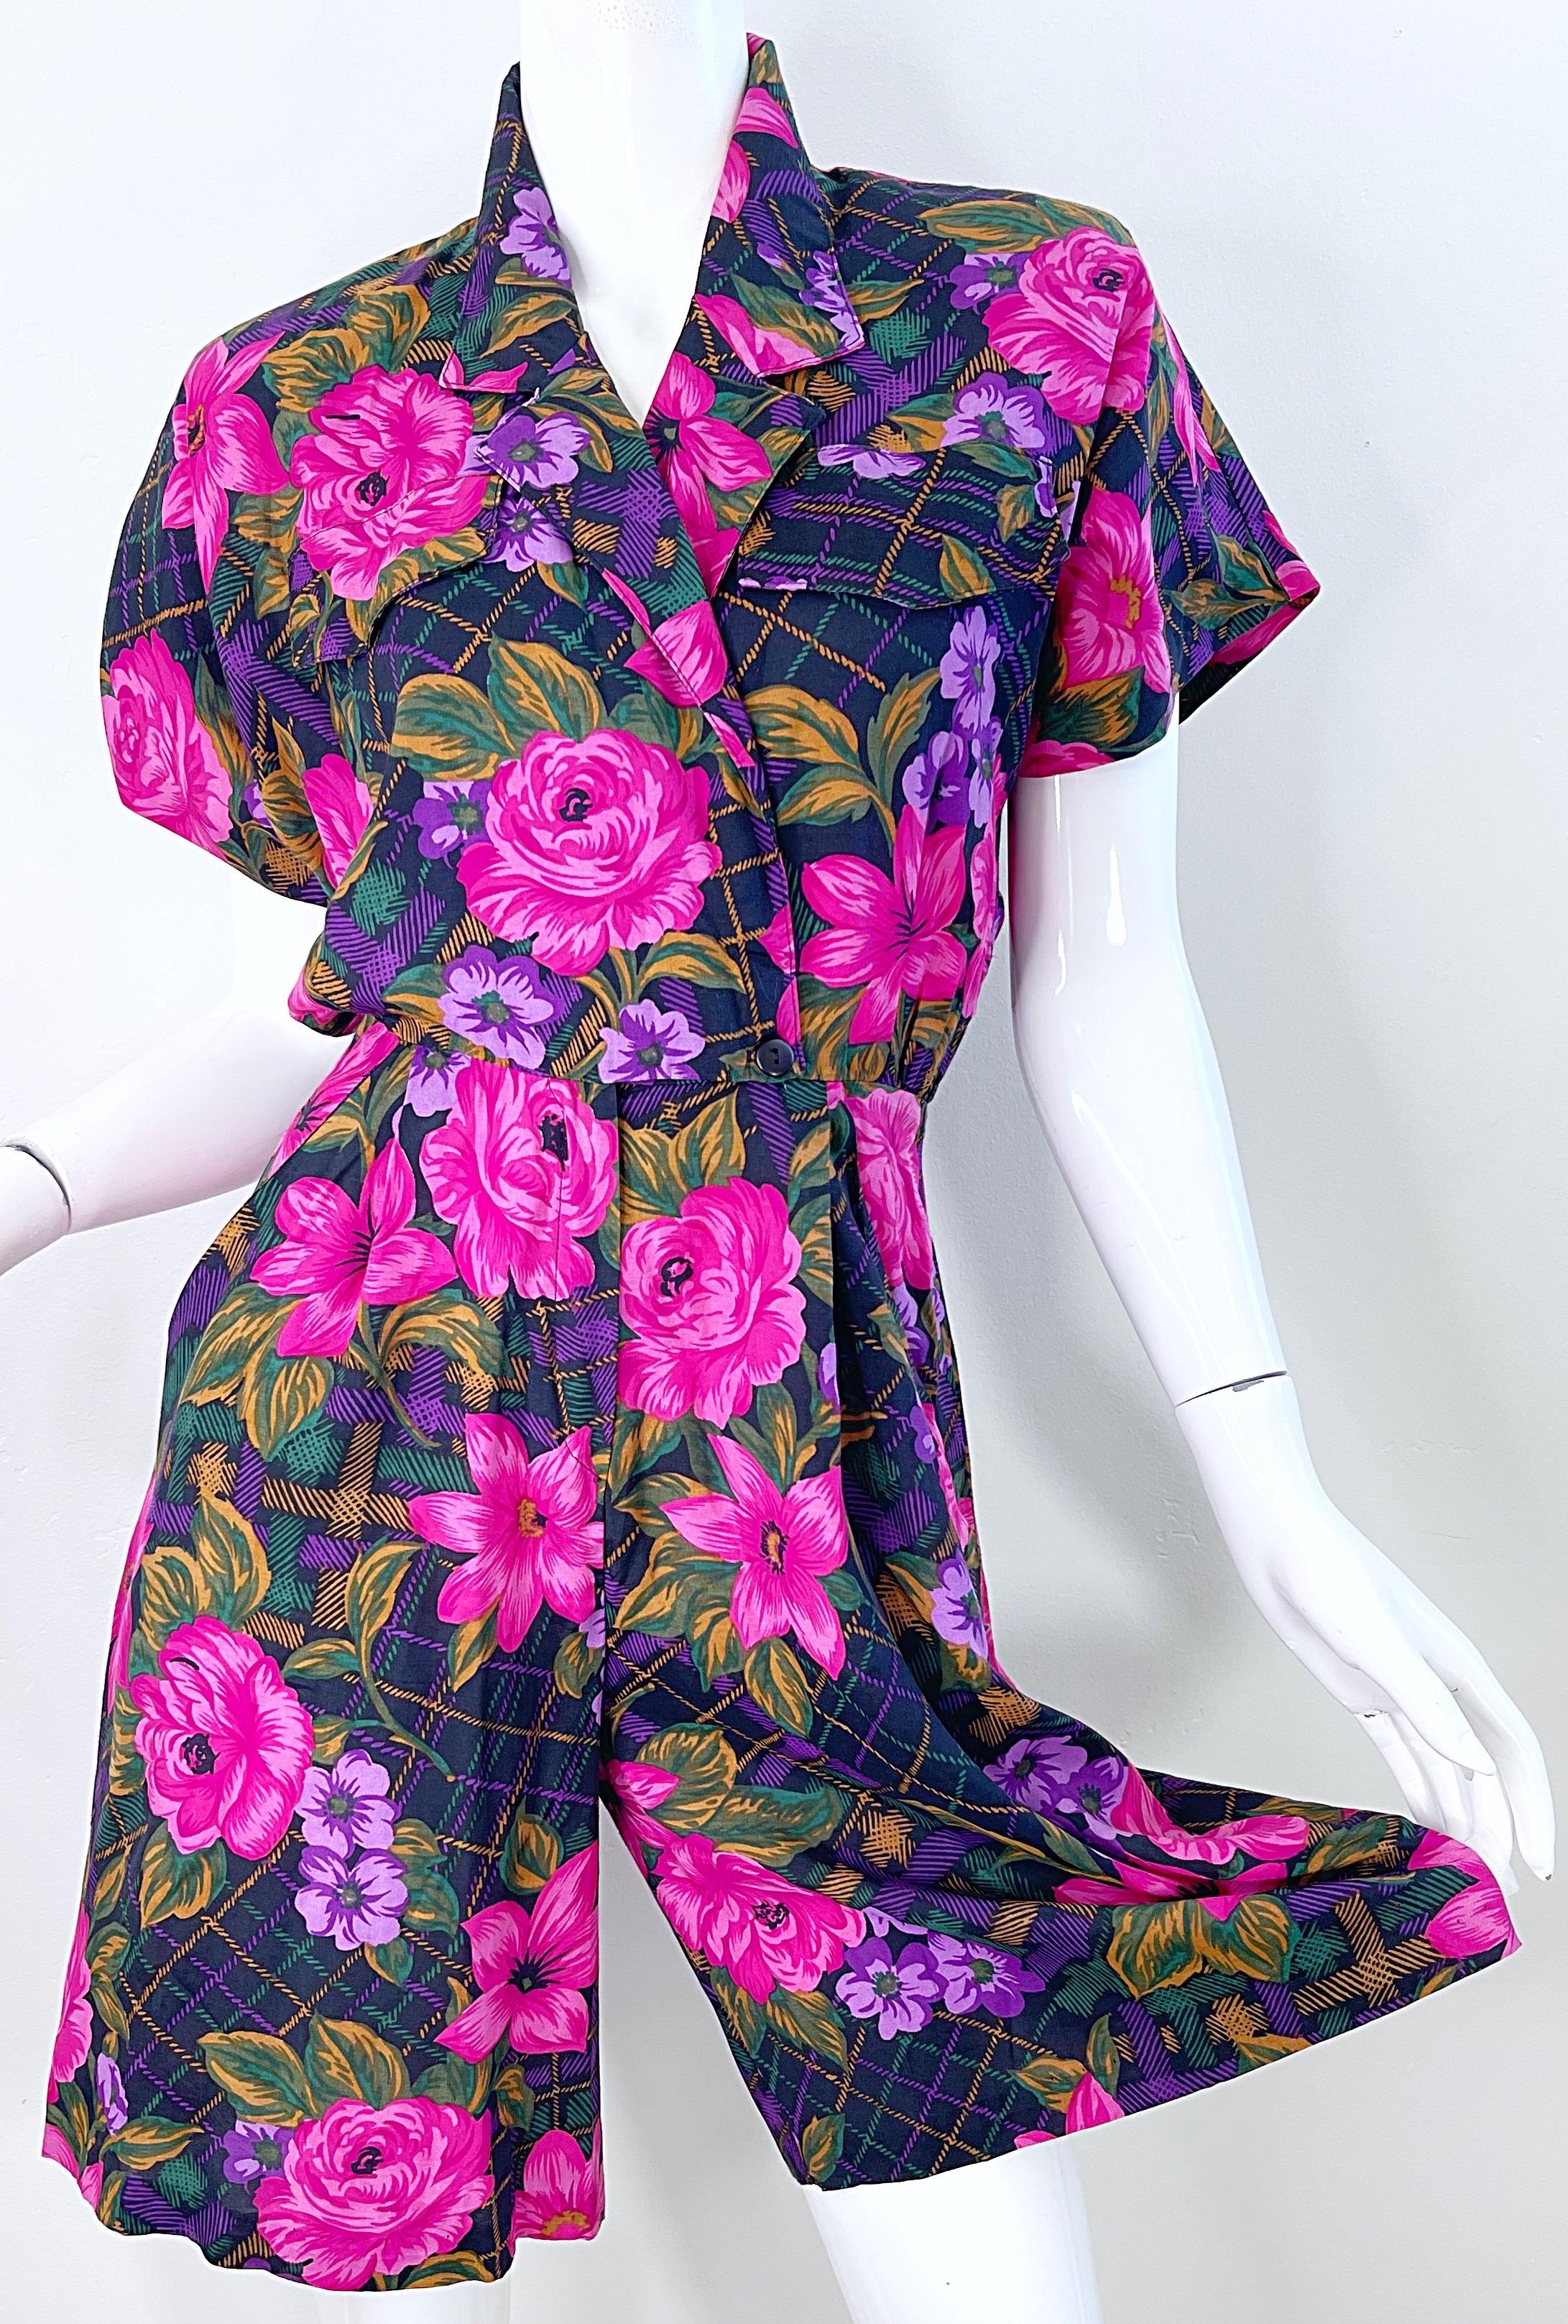 1980s Flower and Plaid Print Pink + Purple Short Sleeve Vintage 80s Romper  For Sale 7